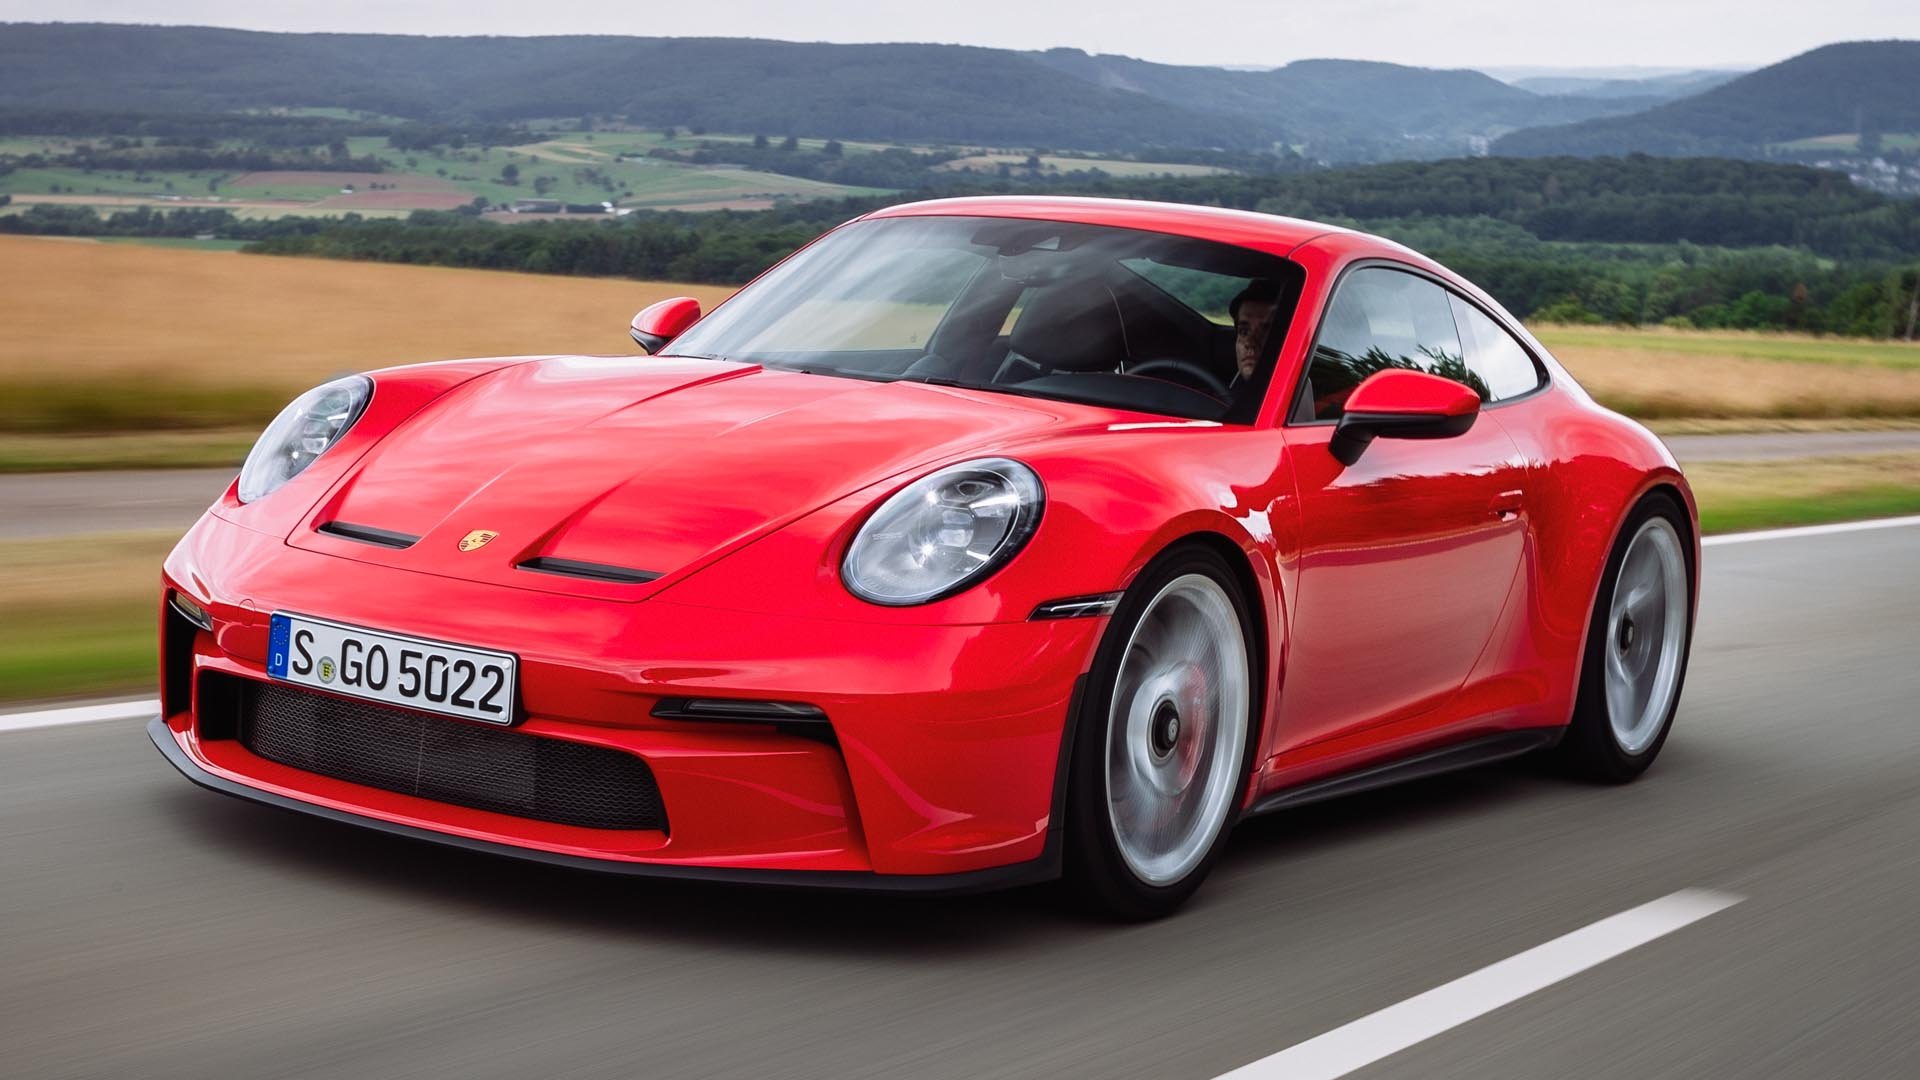 Best fast cars to enjoy slowly